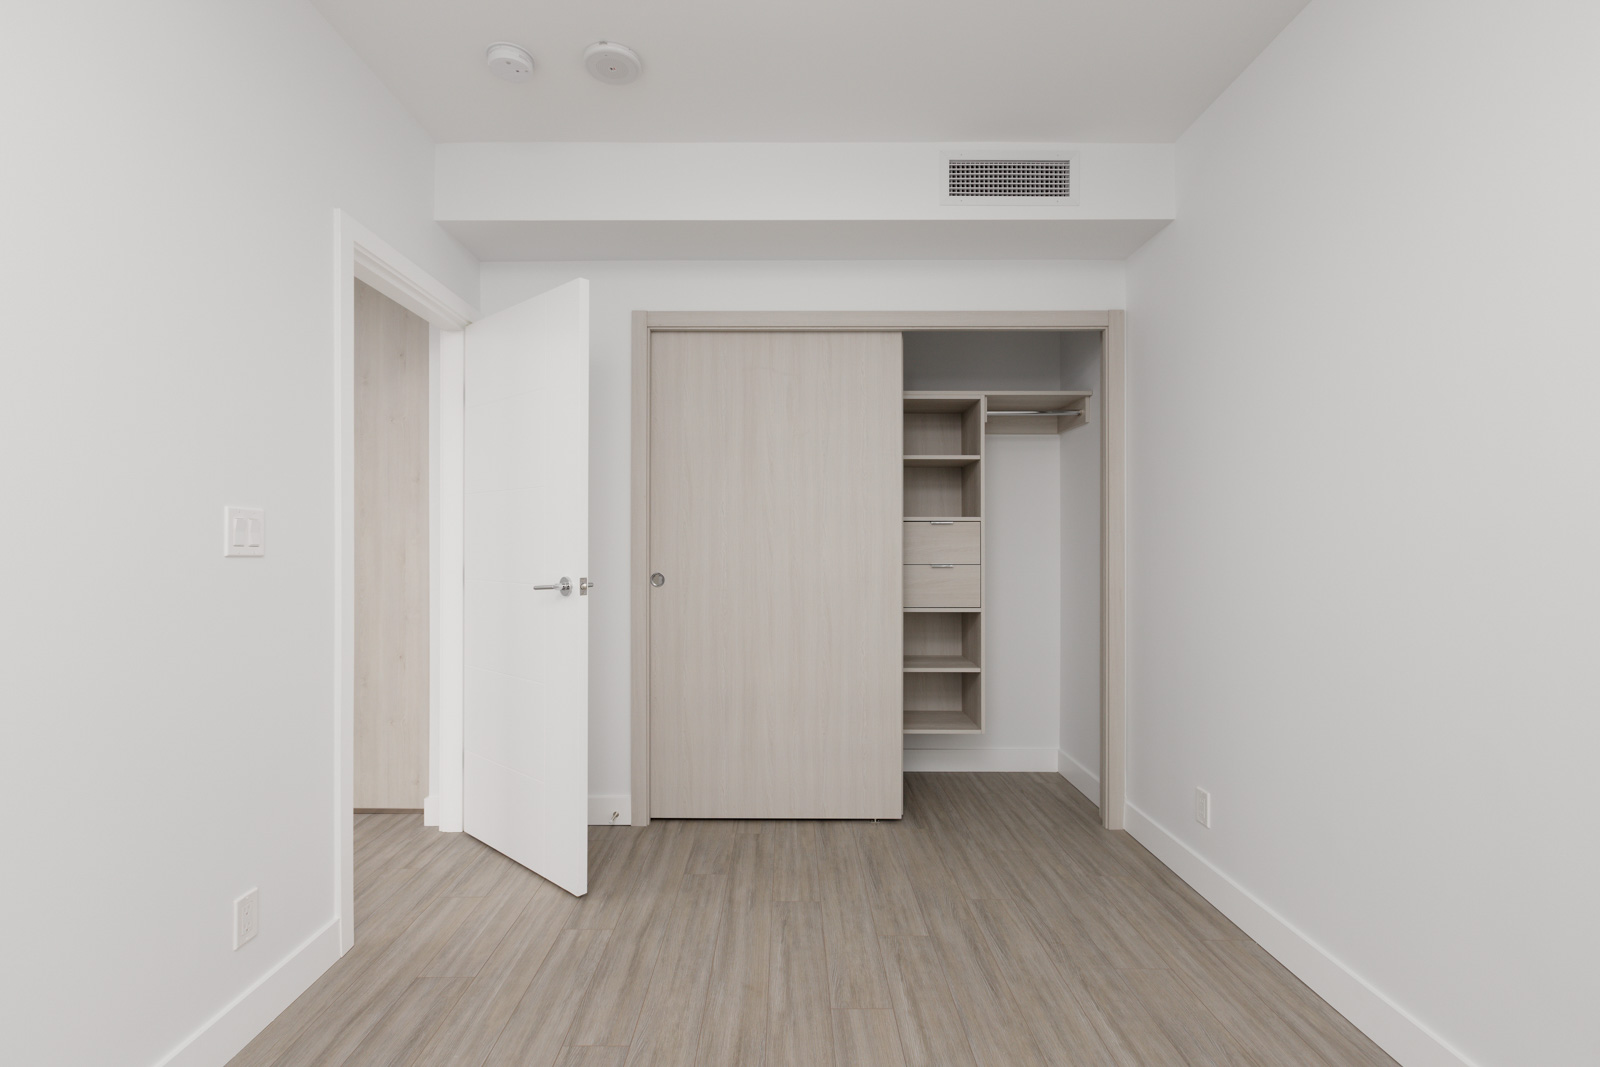 Walk in closet at Sun Tower 1 building in Burnaby’s Metrotown